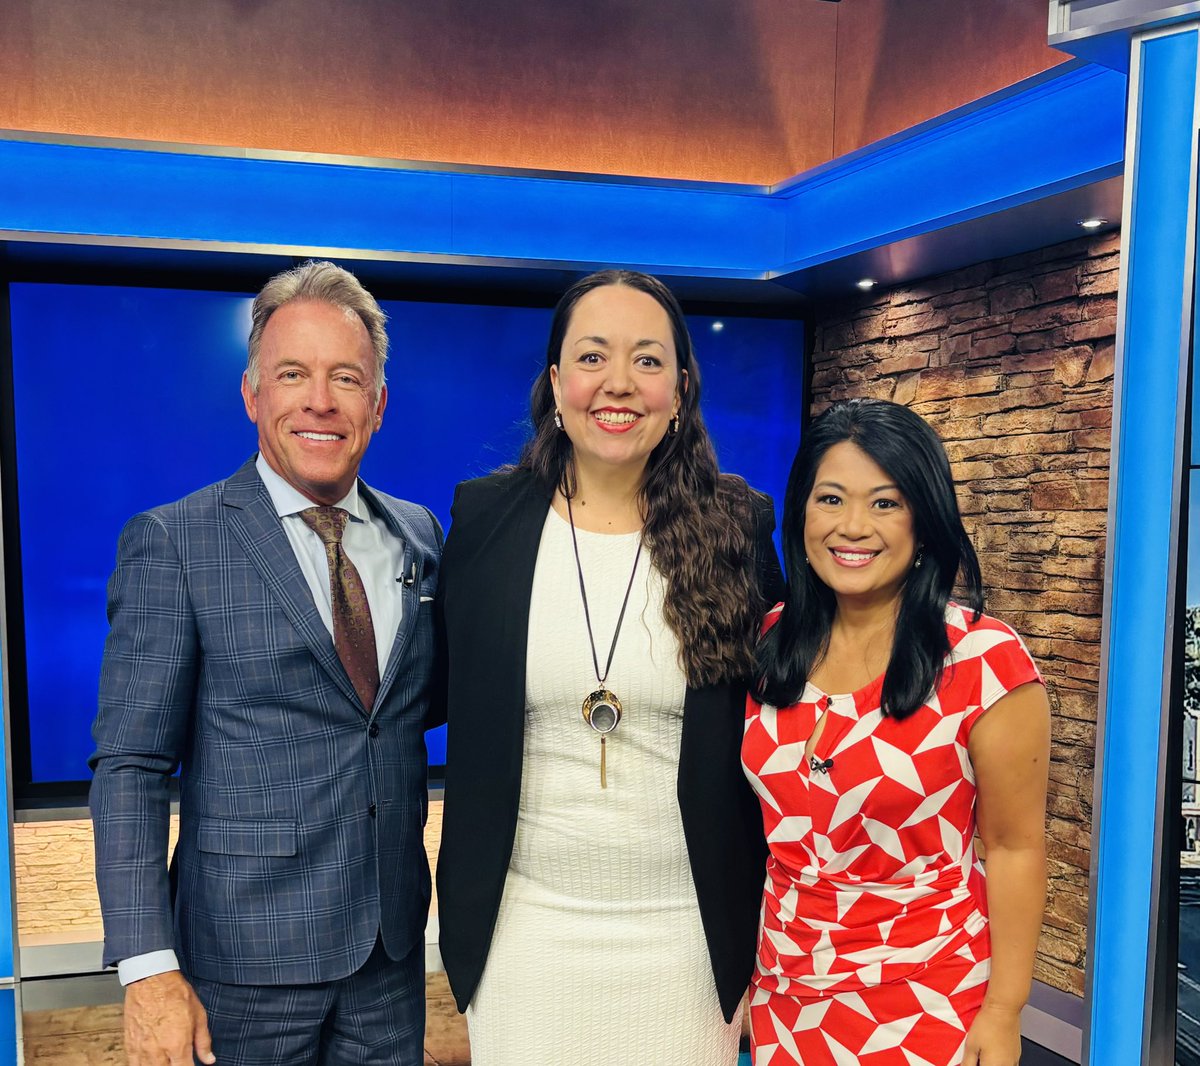 I had the opportunity to talk about cardiovascular disease risk in postmenopausal women today on Good Morning Arizona Channel 3. 👉🏼 Women’s CVD risk goes up after menopause. 👉🏼 Exercise, a heart healthy diet, maintaining a healthy weight can reduce CVD risk. @WHMayoClinic